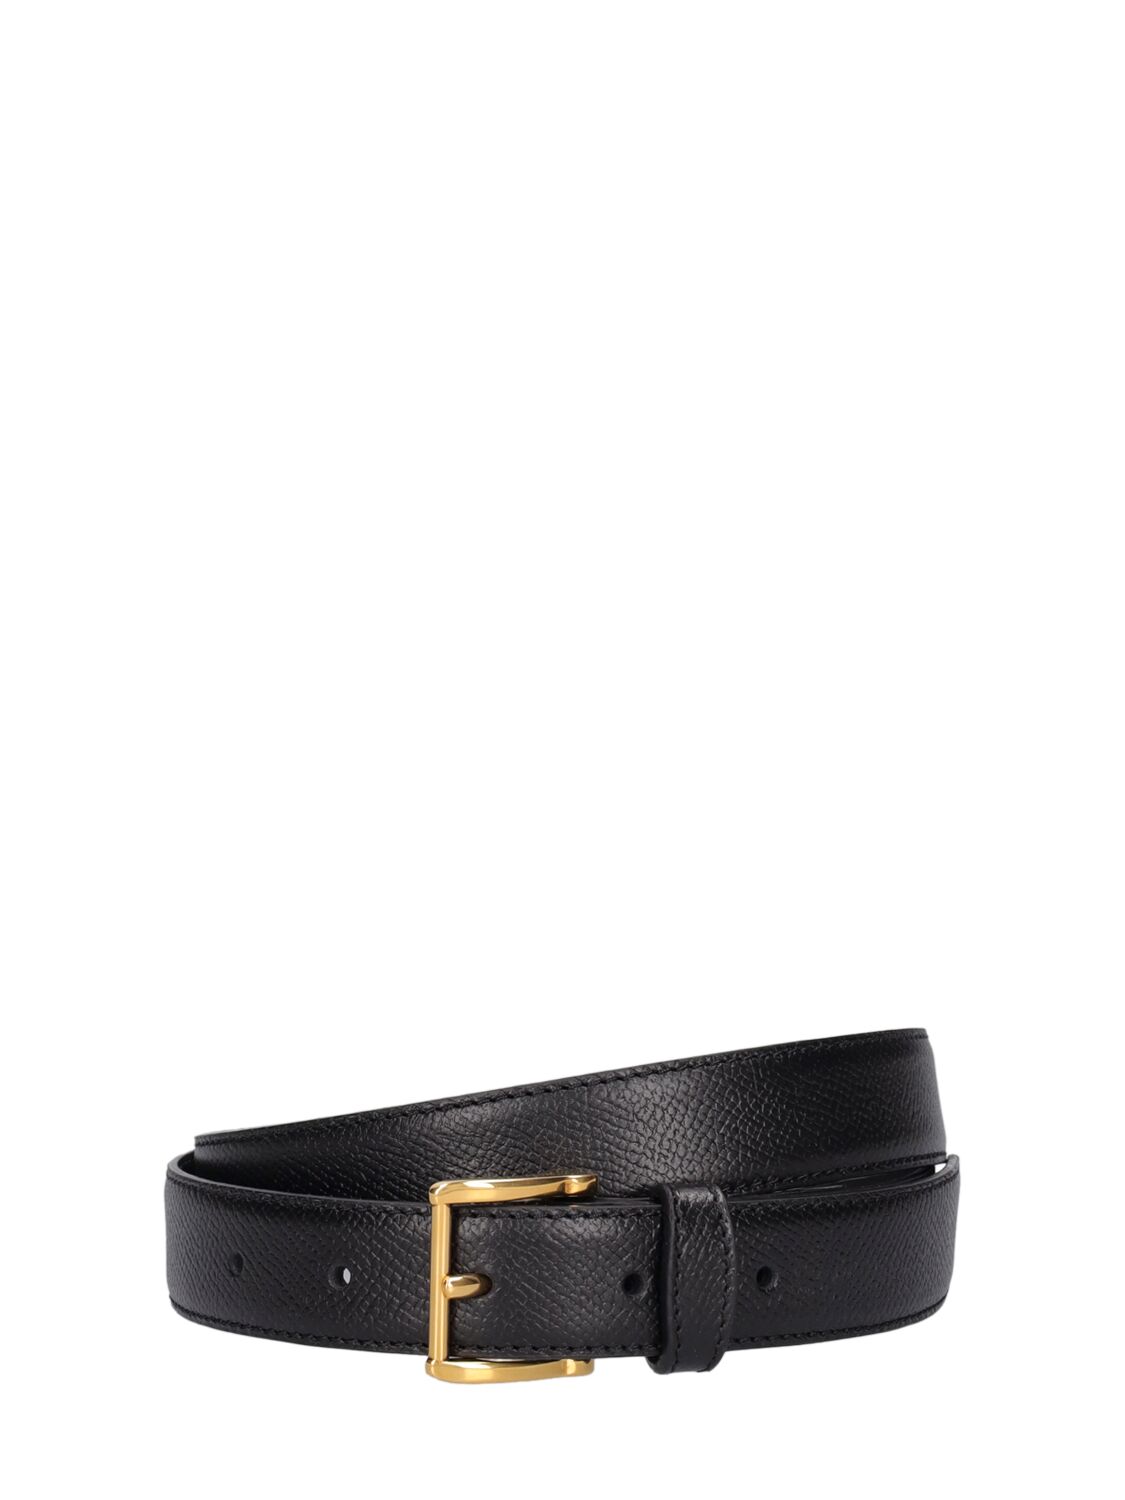 Ami Alexandre Mattiussi 25mm Oval Buckle Grained Leather Belt In Black,gold